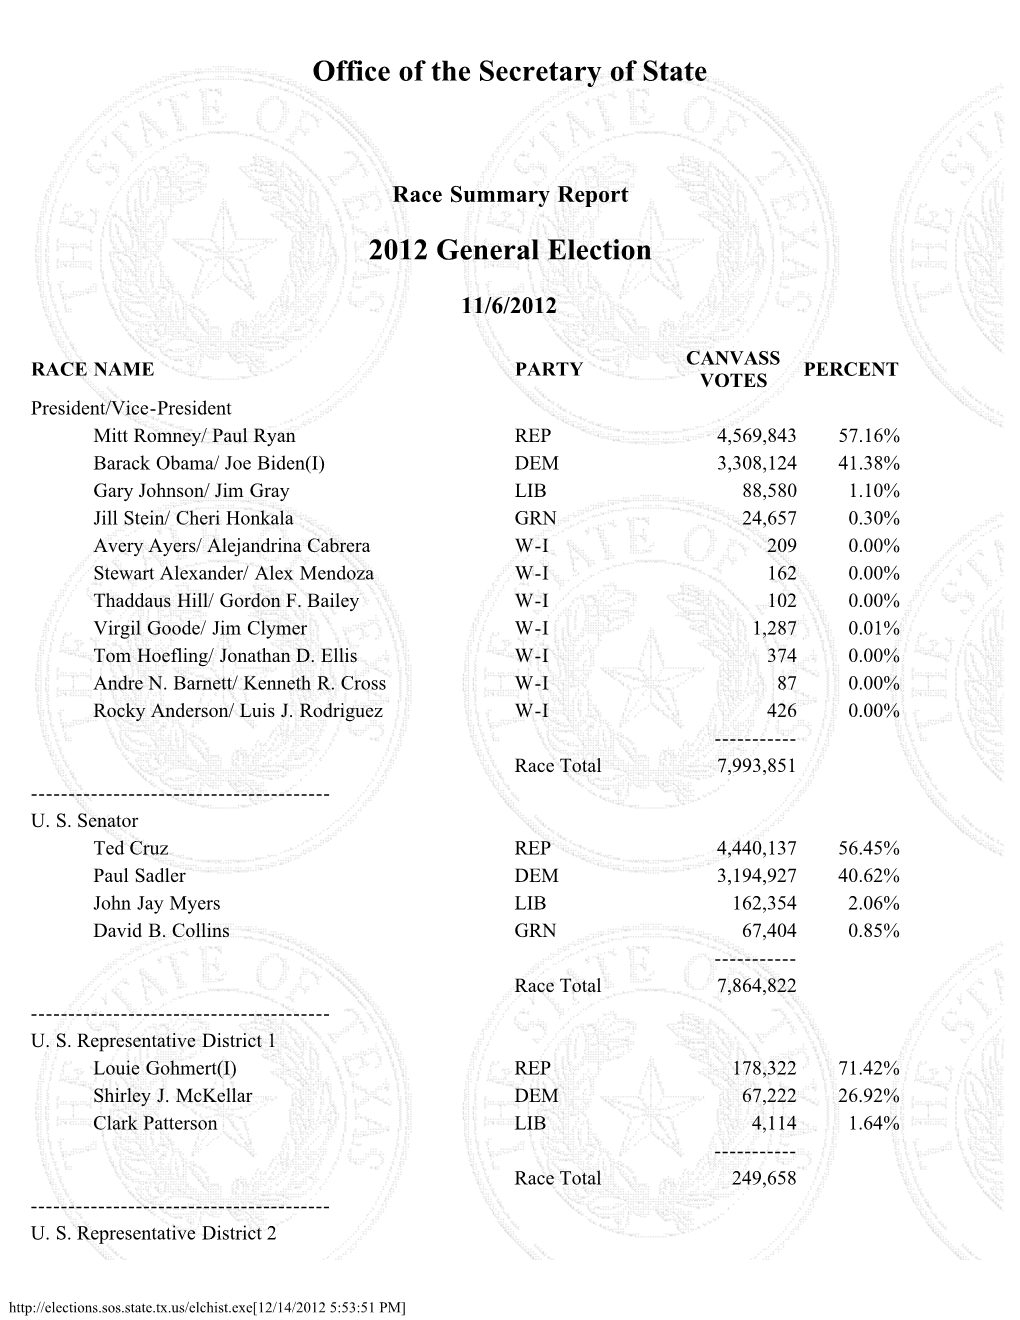 Office of the Secretary of State 2012 General Election